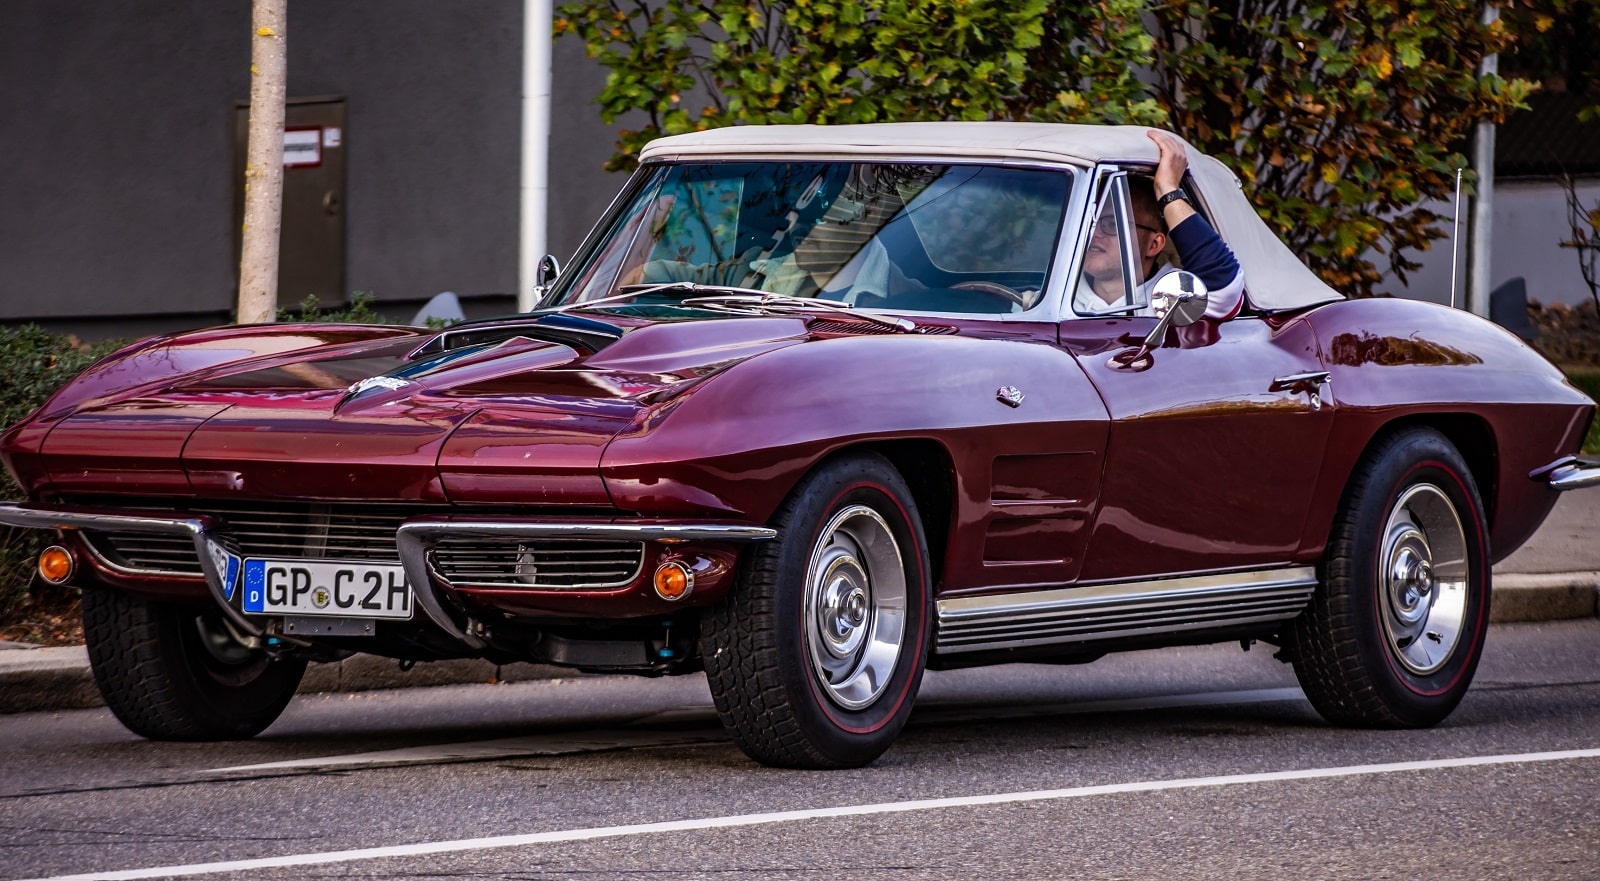 <p class="wp-caption-text">Image Credit: Shutterstock / Krisz12Photo</p>  <p>The ’63 Corvette Stingray is a standout with its unique split rear window and sleek design. Known for its fast moves and fiberglass body, it’s still a head-turner and a favorite among sports car fans.</p>